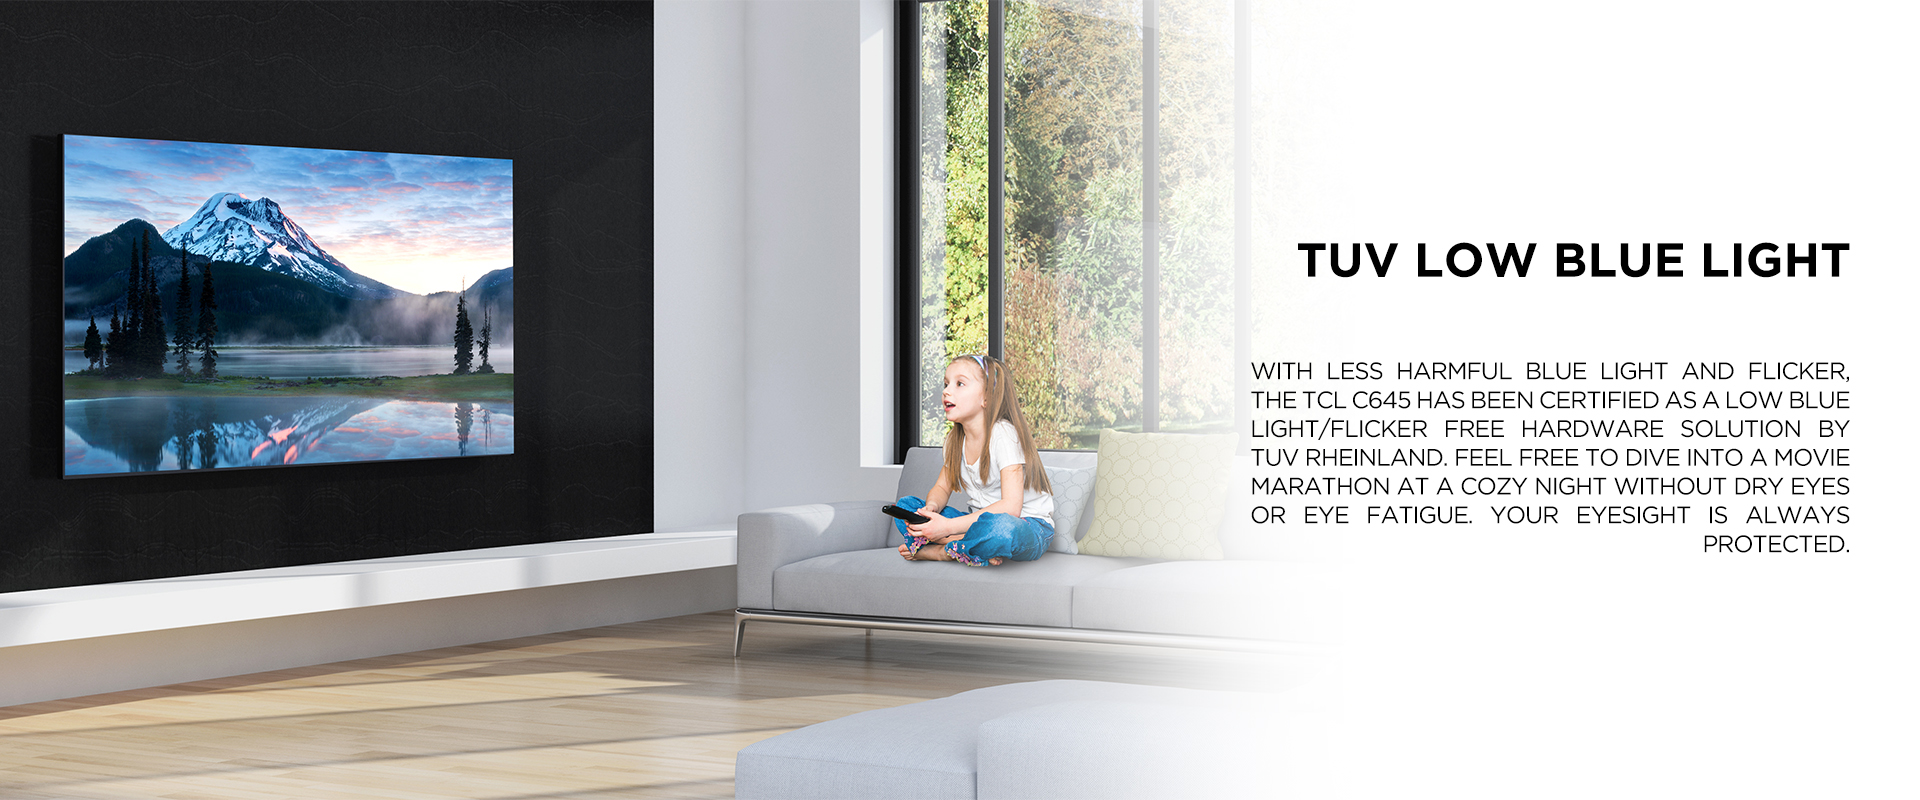 TUV Low Blue Light - With less harmful blue light and flicker, the TCL C645 has been certified as a low blue light/flicker free hardware solution by TUV Rheinland. Feel free to dive into a movie marathon at a cozy night without dry eyes or eye fatigue. Your eyesight is always protected.